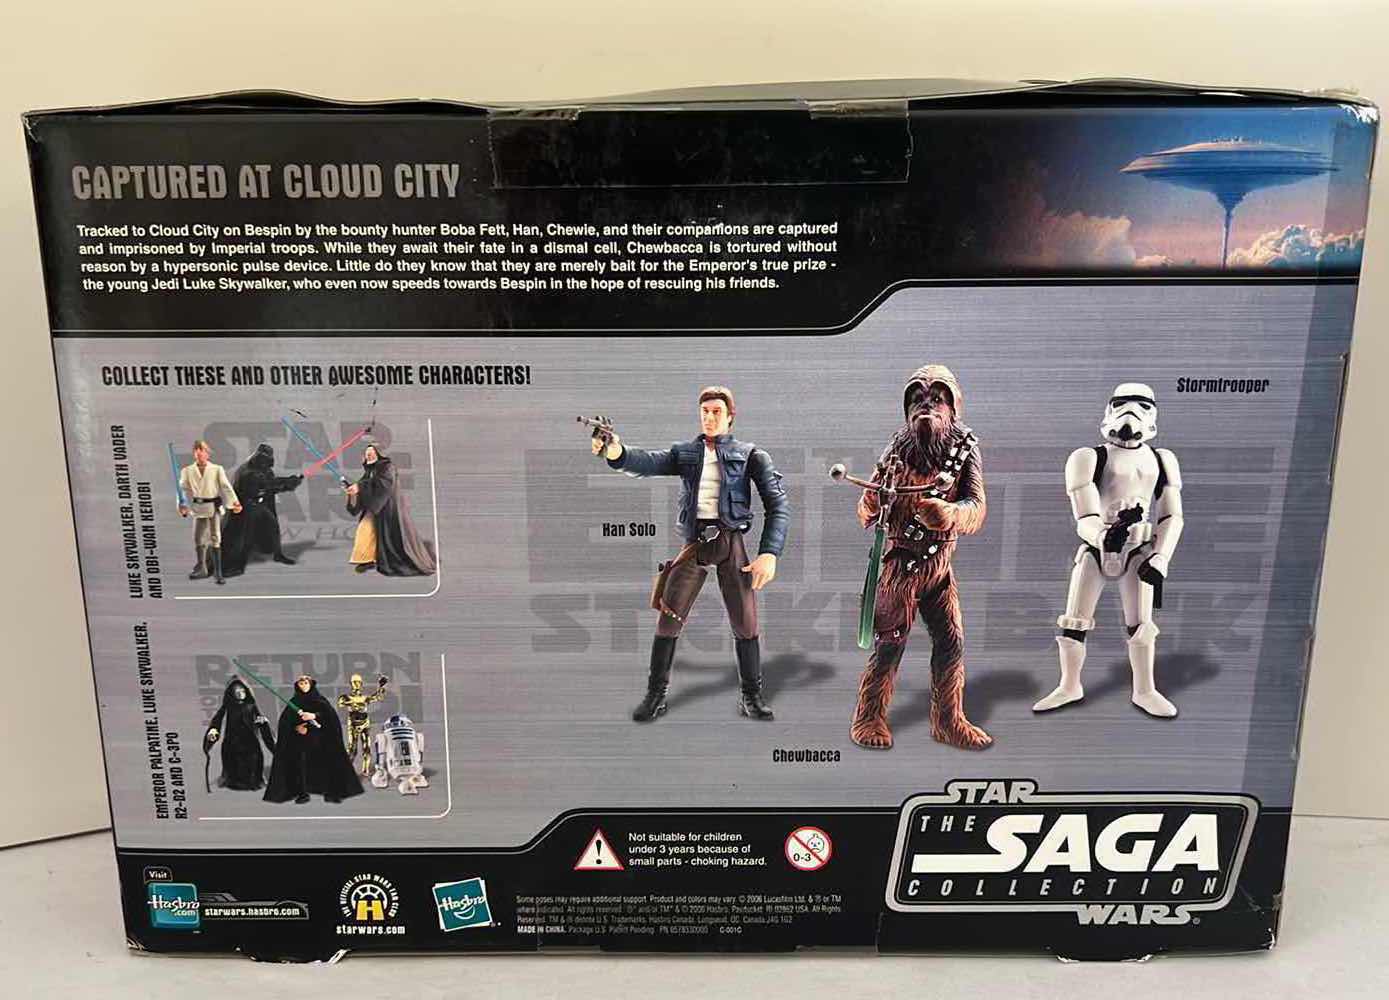 Photo 2 of BRAND NEW THE SAGA COLLECTION STAR WARS FIGURINES  $20